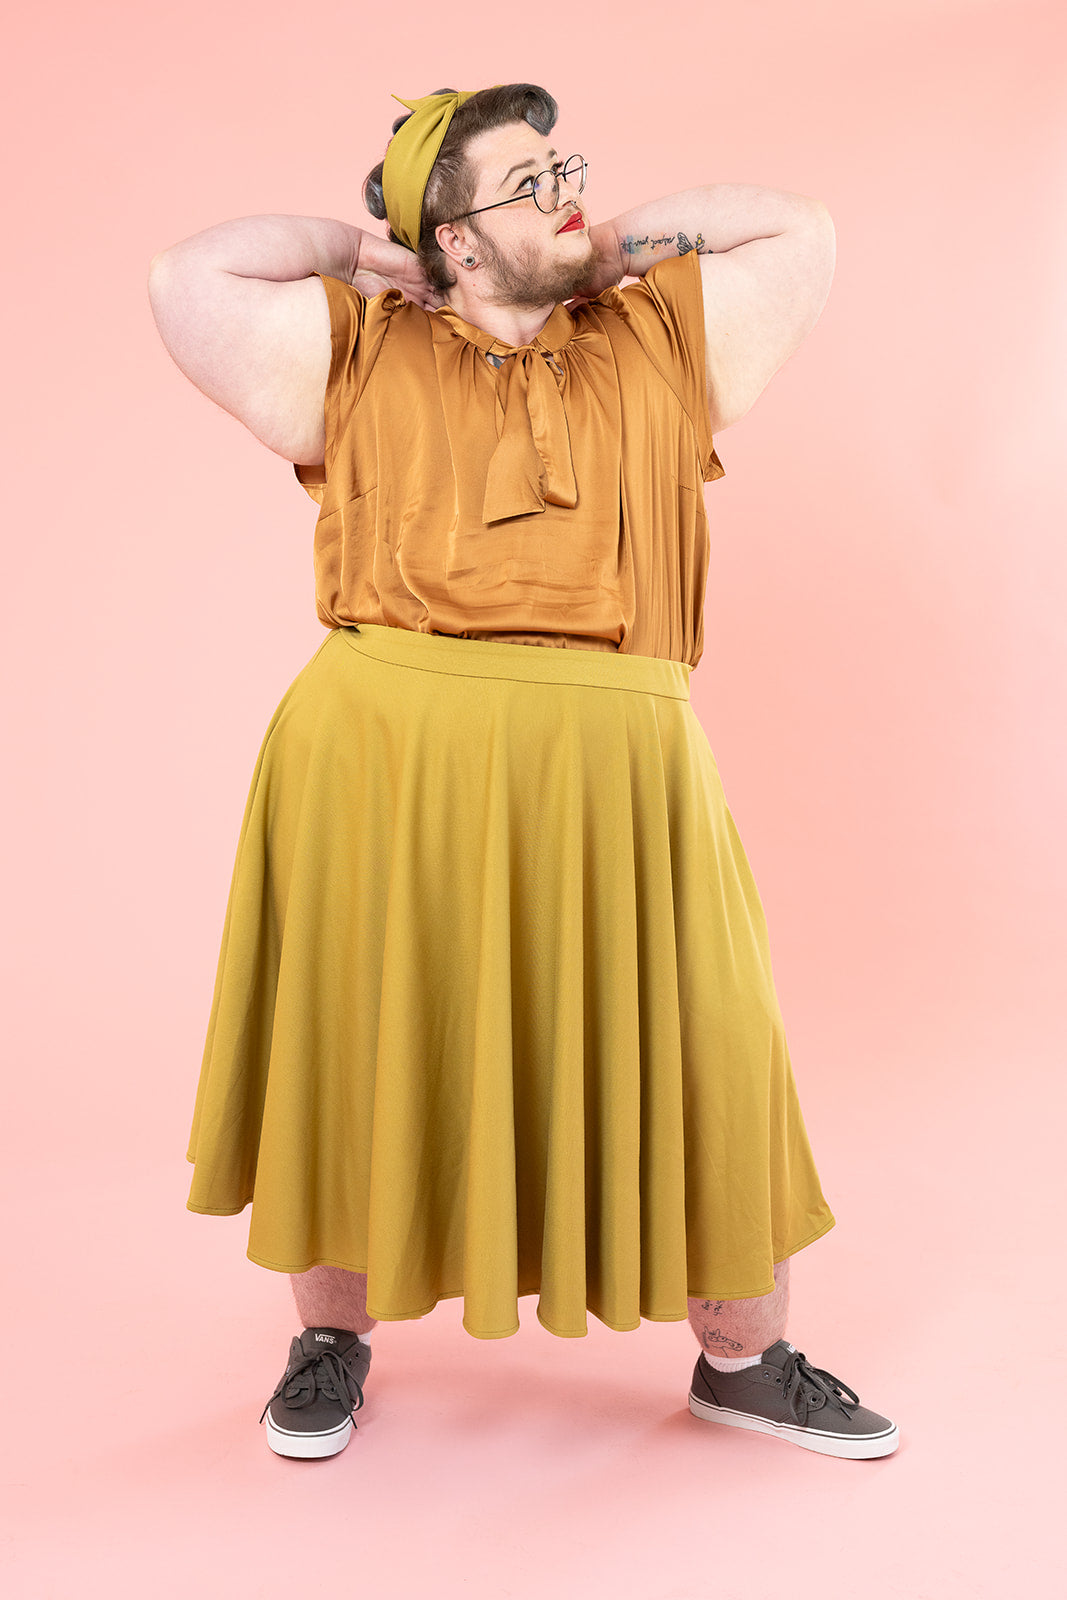 A gender non-conforming person is posing with their arms by their face.  They are wearing red lipstick and have their hair in a vintage-inspired updo. They have facial hair. They are wearing a bronze silk shirt and mustard skirt.